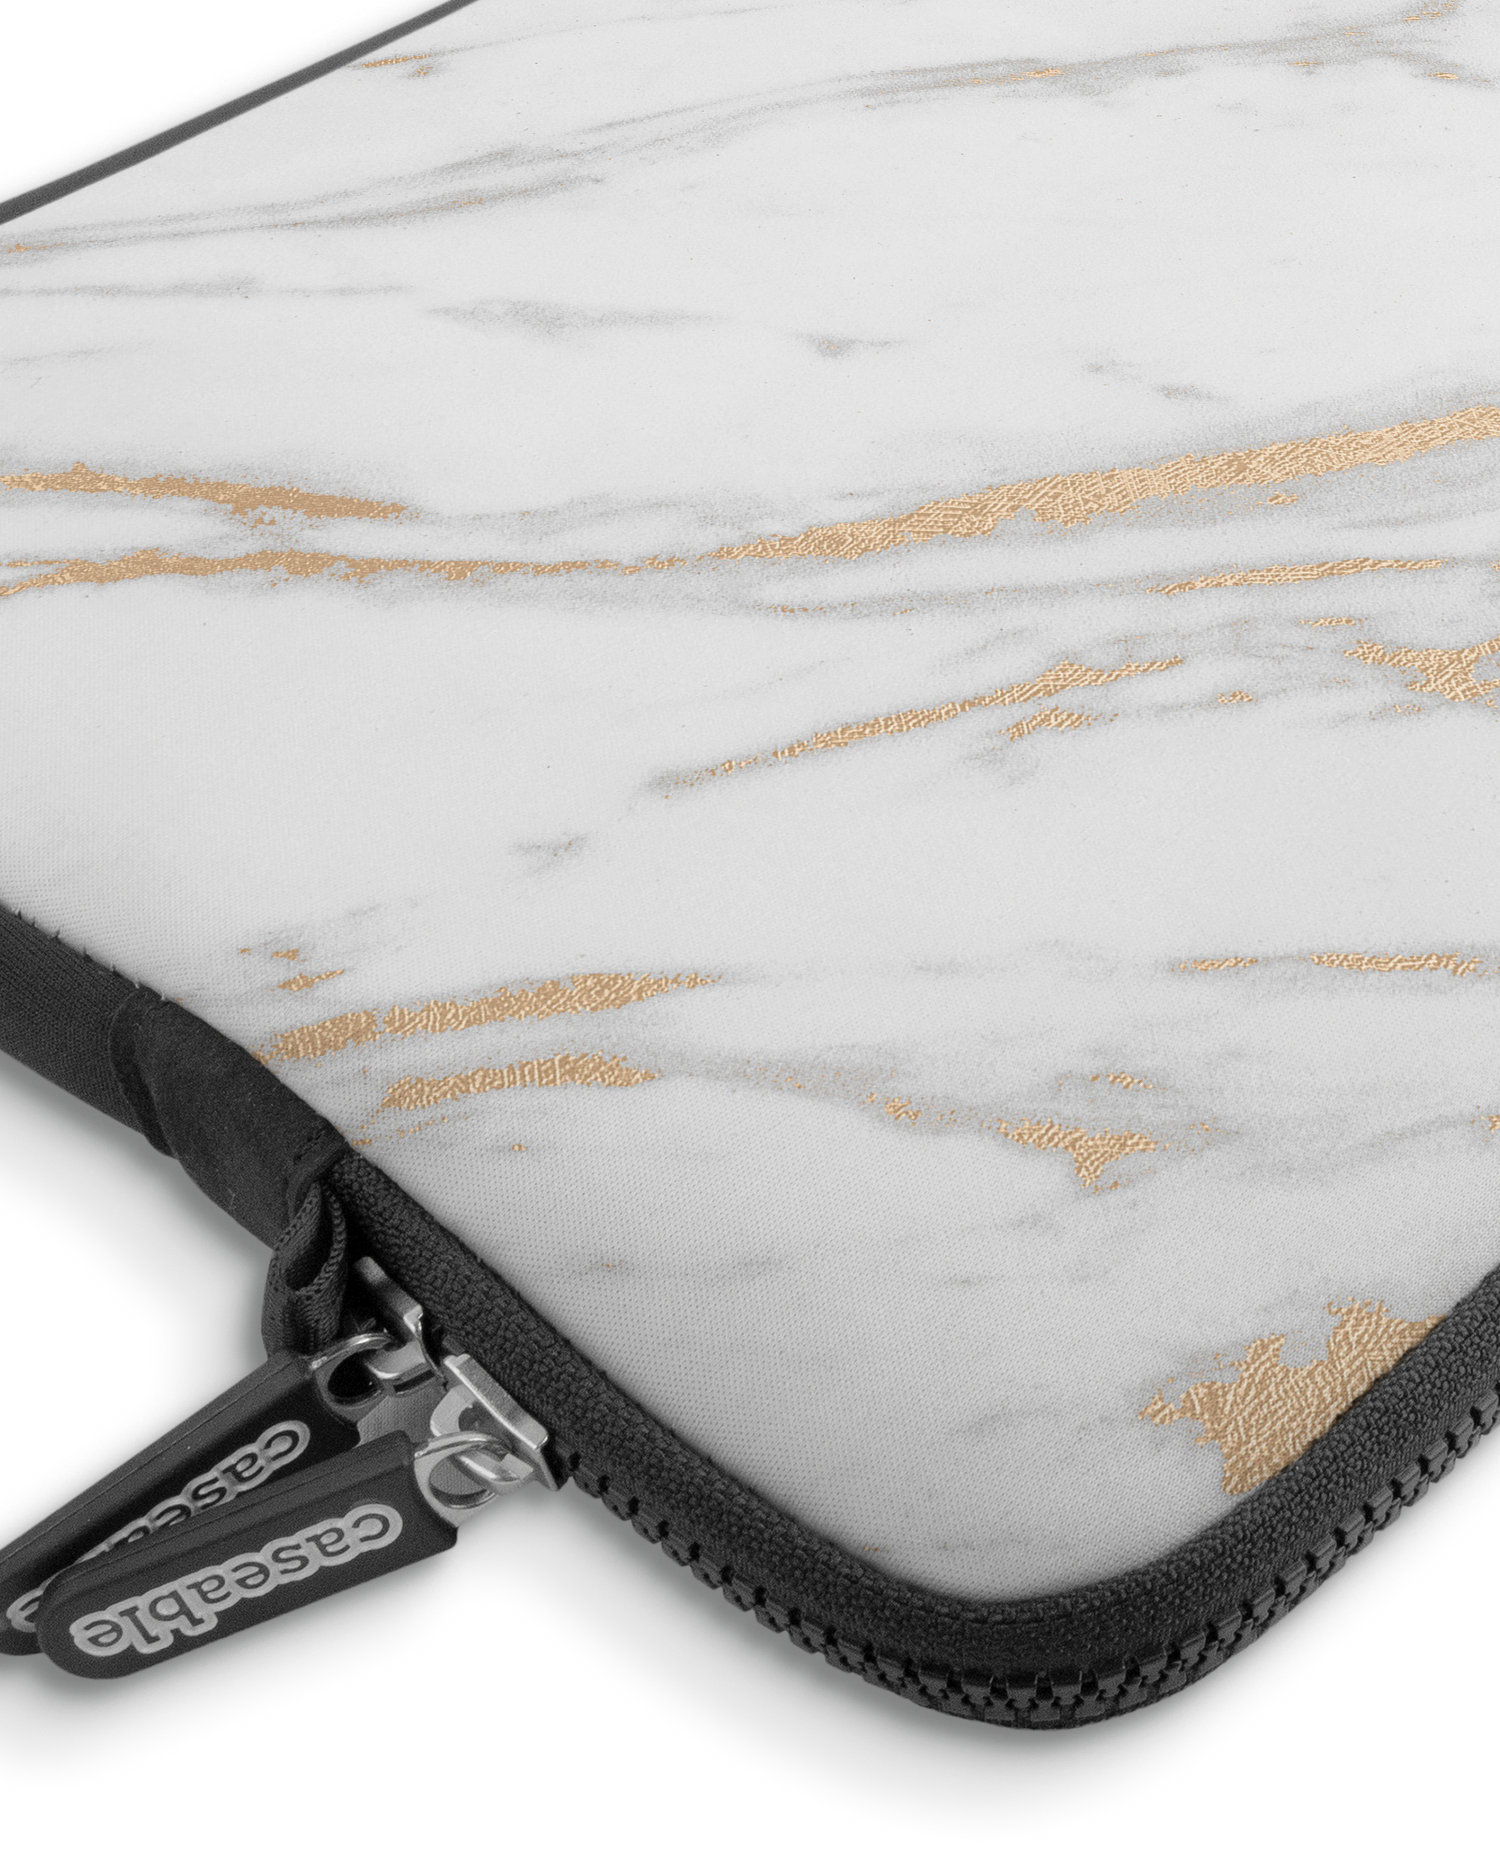 Gold Marble Elegance Premium Laptop Bag 13-14 inch with device inside